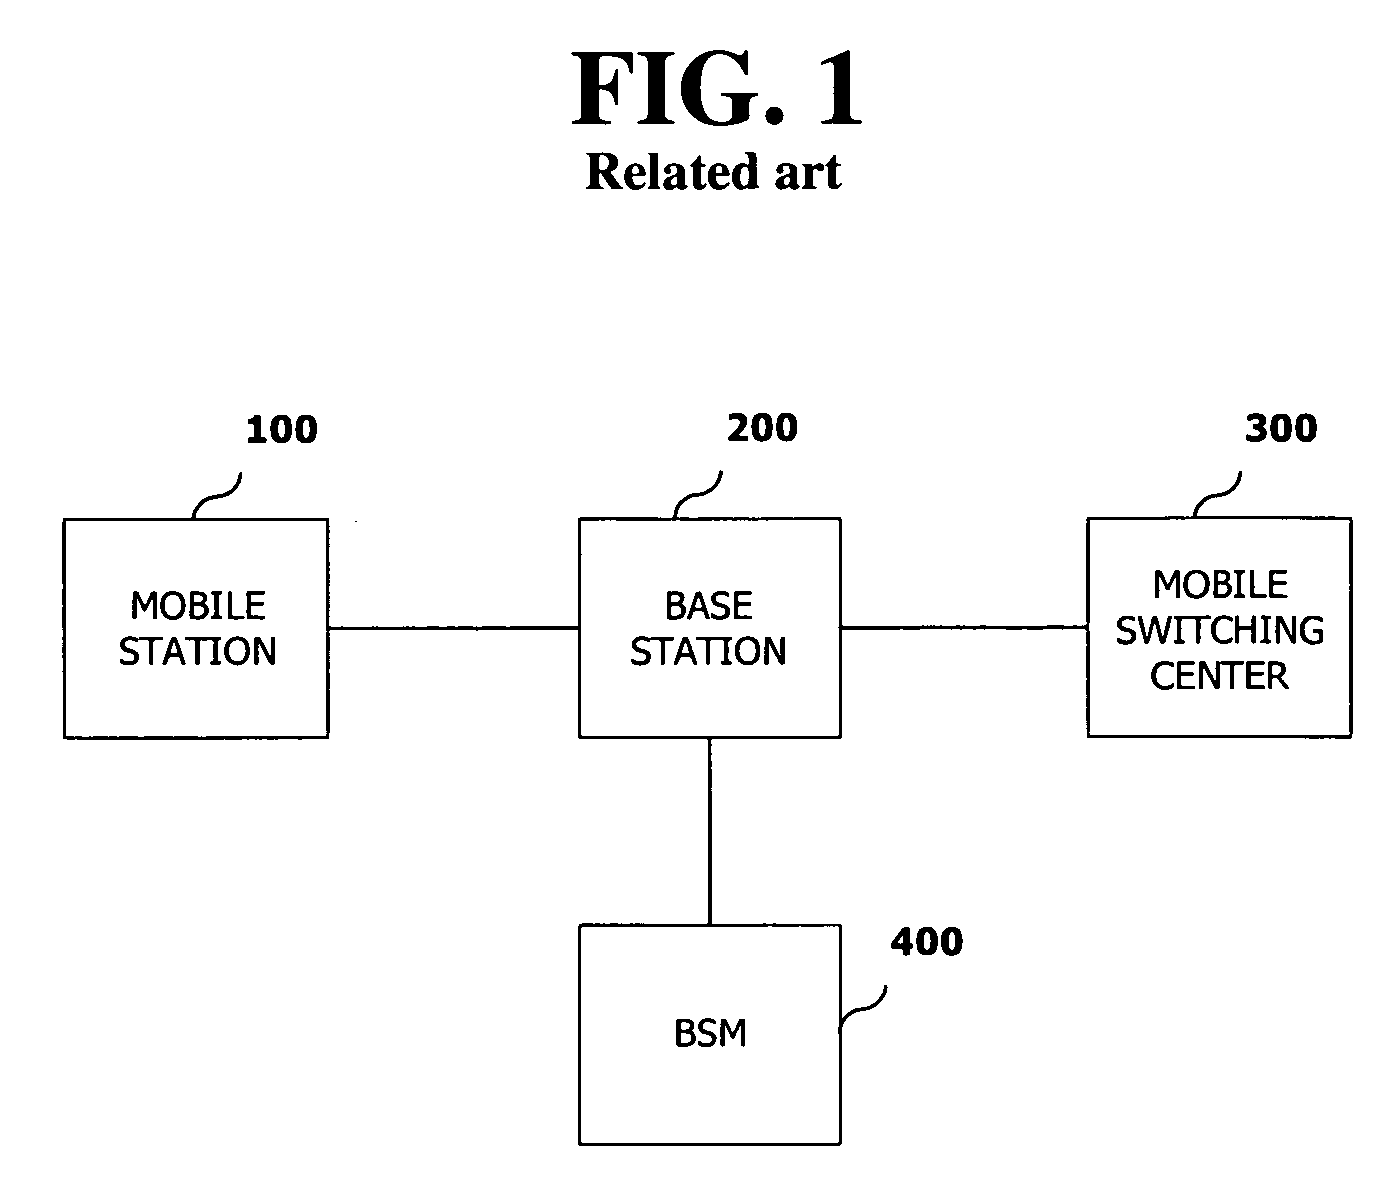 Transmission power control of a base station in a mobile communication system